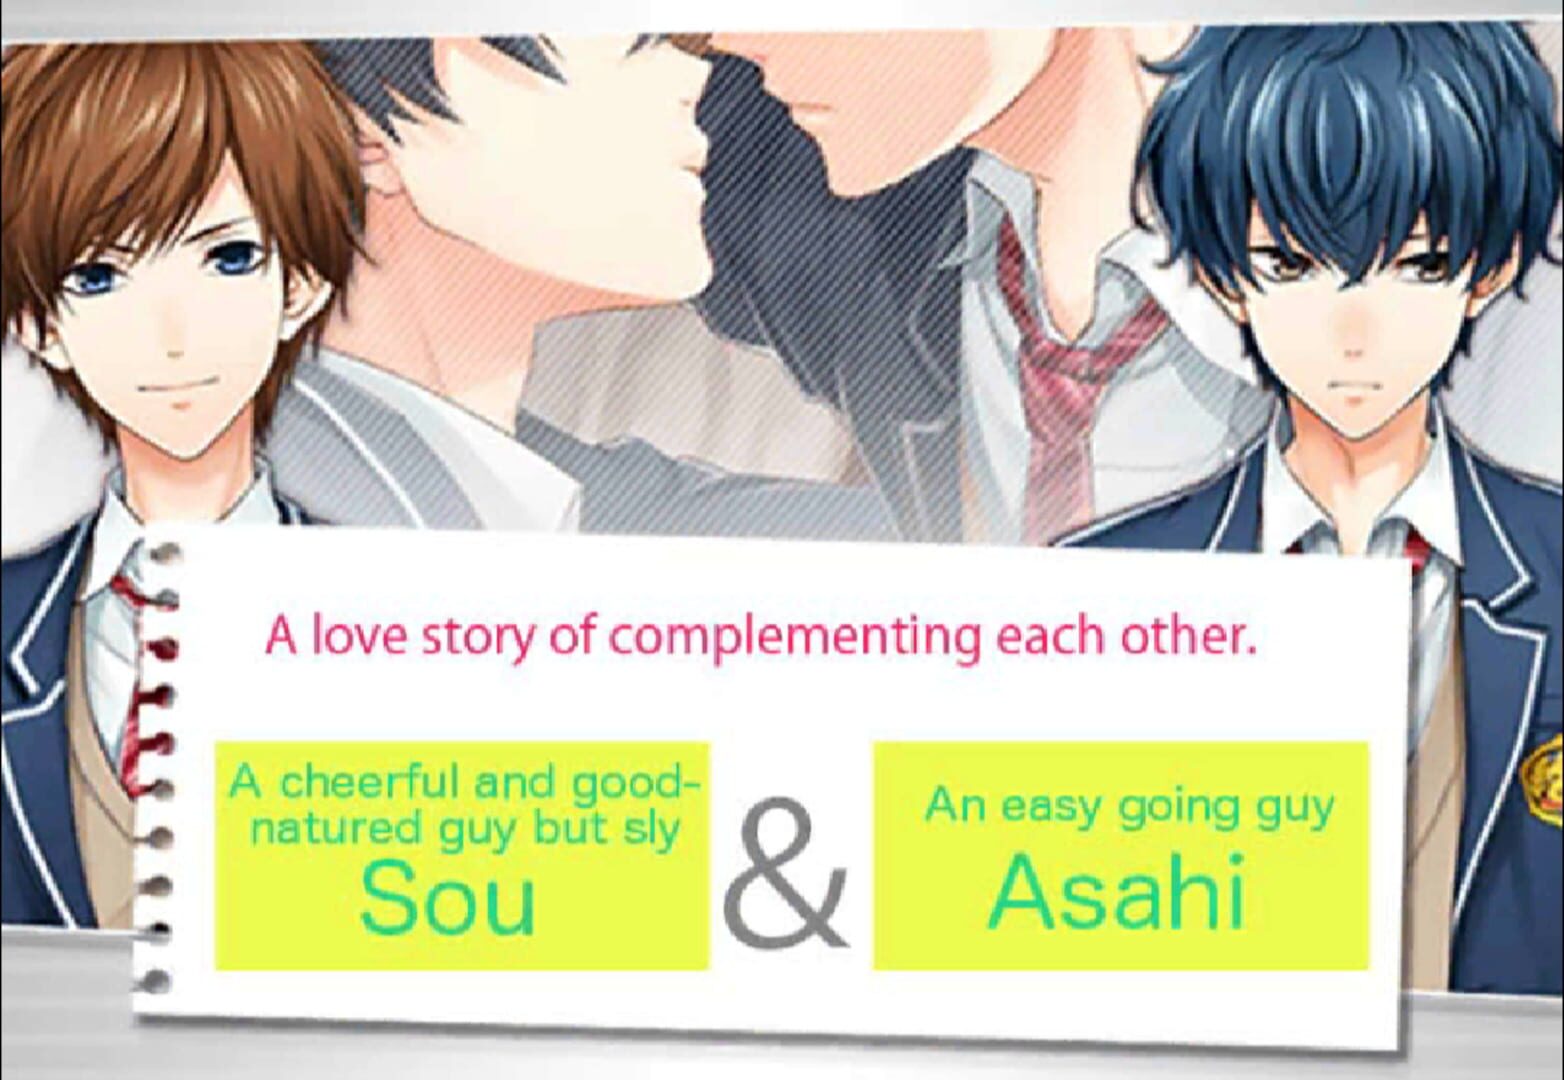 Read love stories. First Love story Yaoi со и Асахи. First Love story Otome. First Love story Читосе и Асахи. Новелла first Love story.